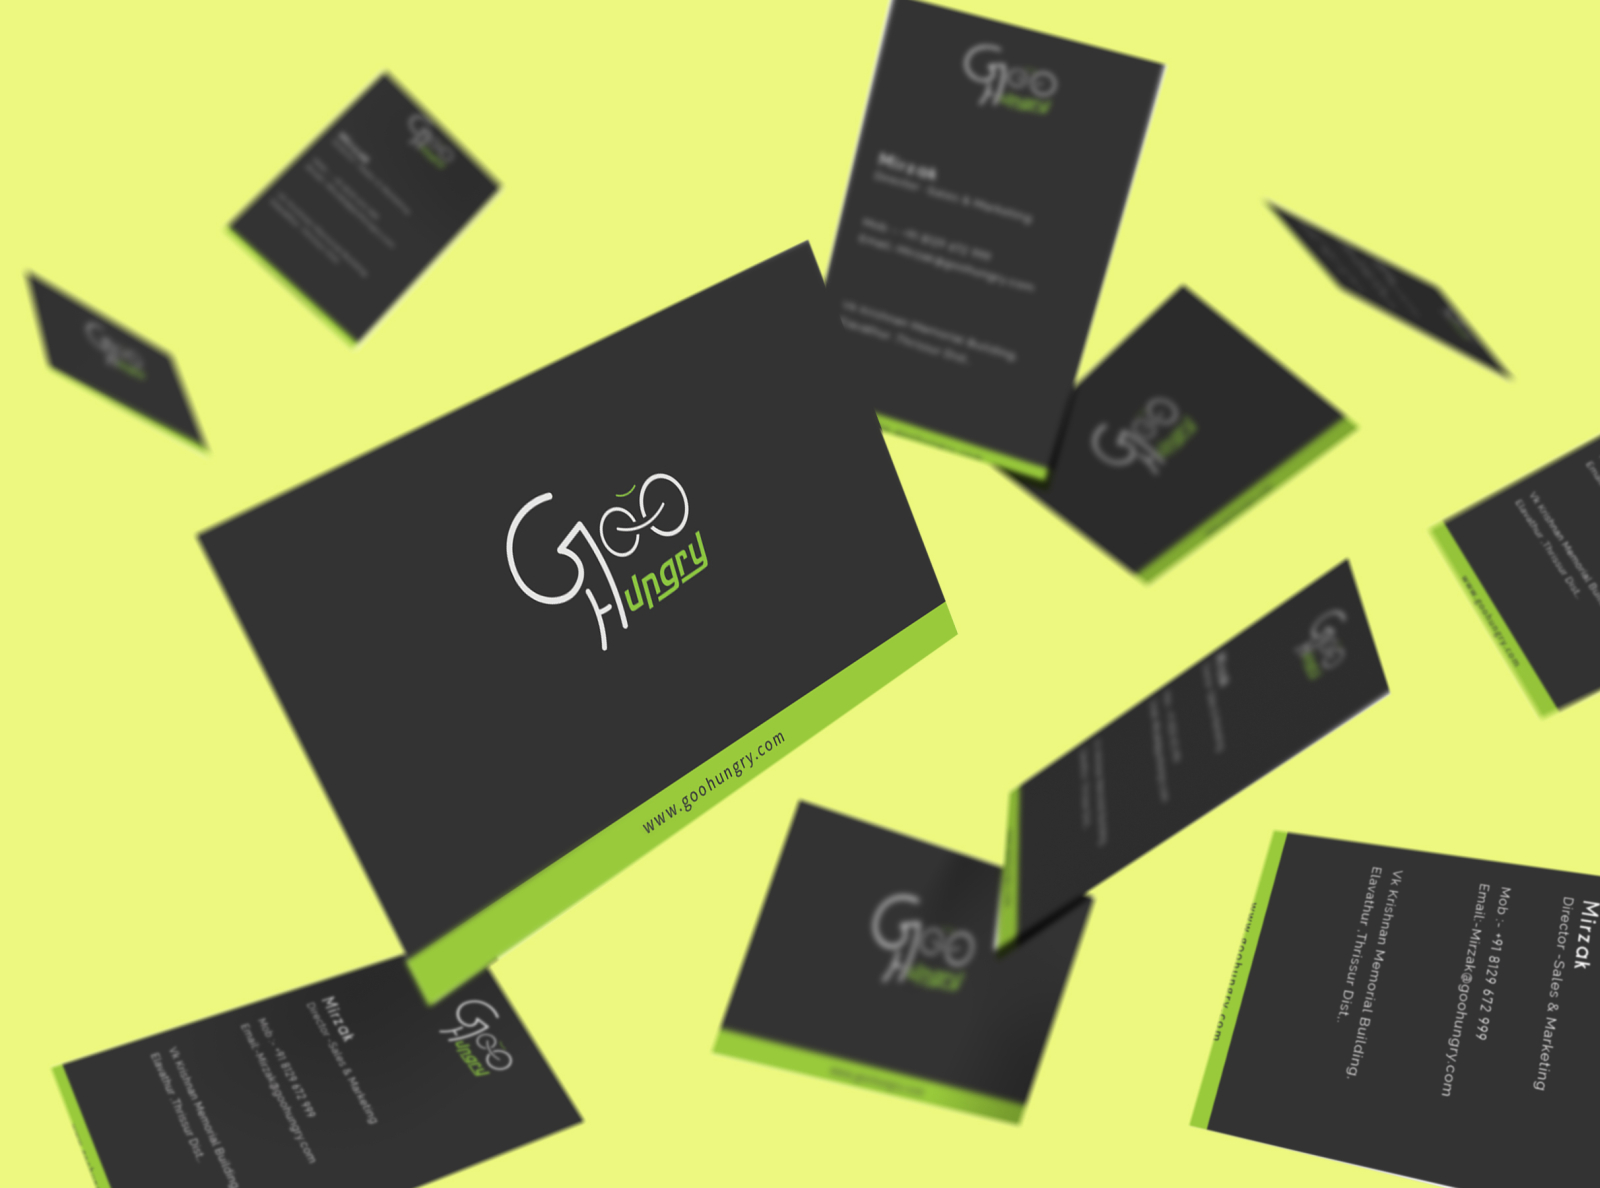 Download Business Card Mockup For Goohungry By Sidhanth Povil On Dribbble PSD Mockup Templates